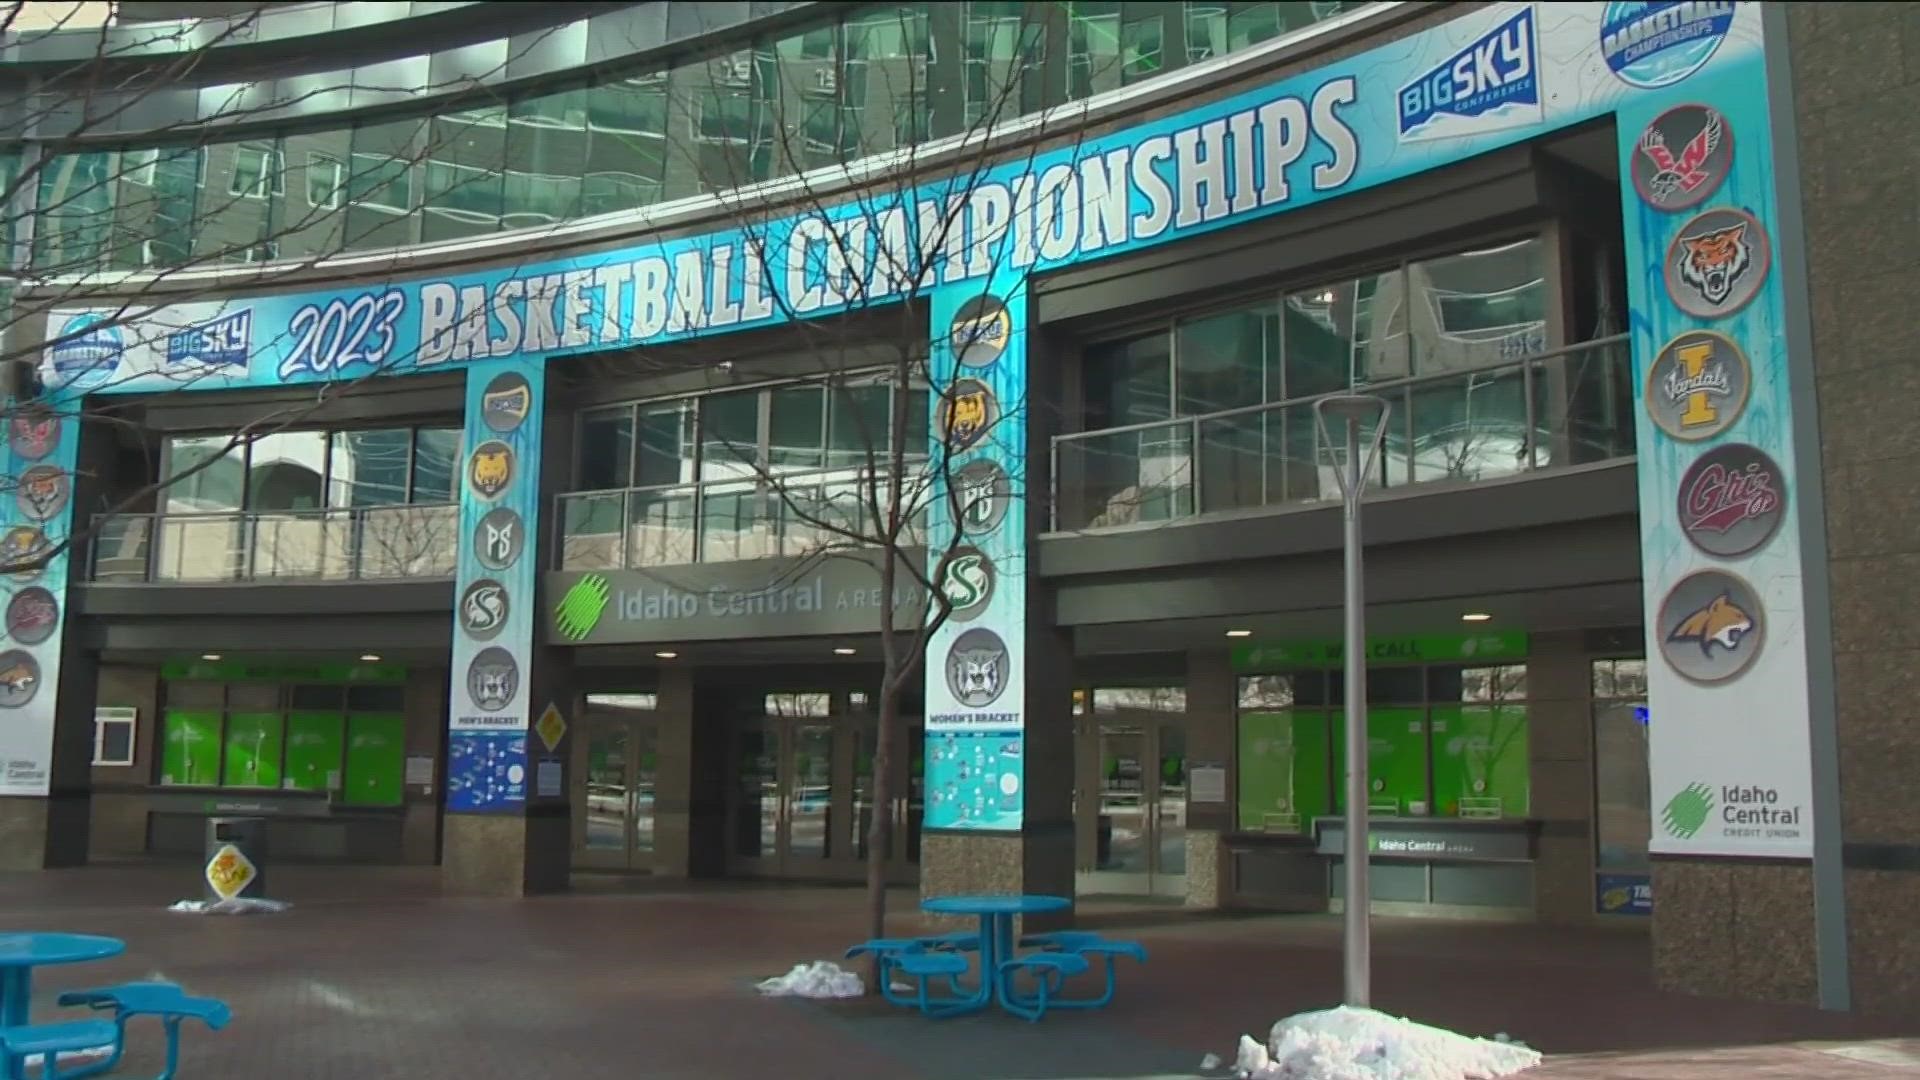 Nearly 3,000 people are expected to visit downtown Boise as 10 Big Sky Conference schools compete for a trip to the NCAA Tournament.